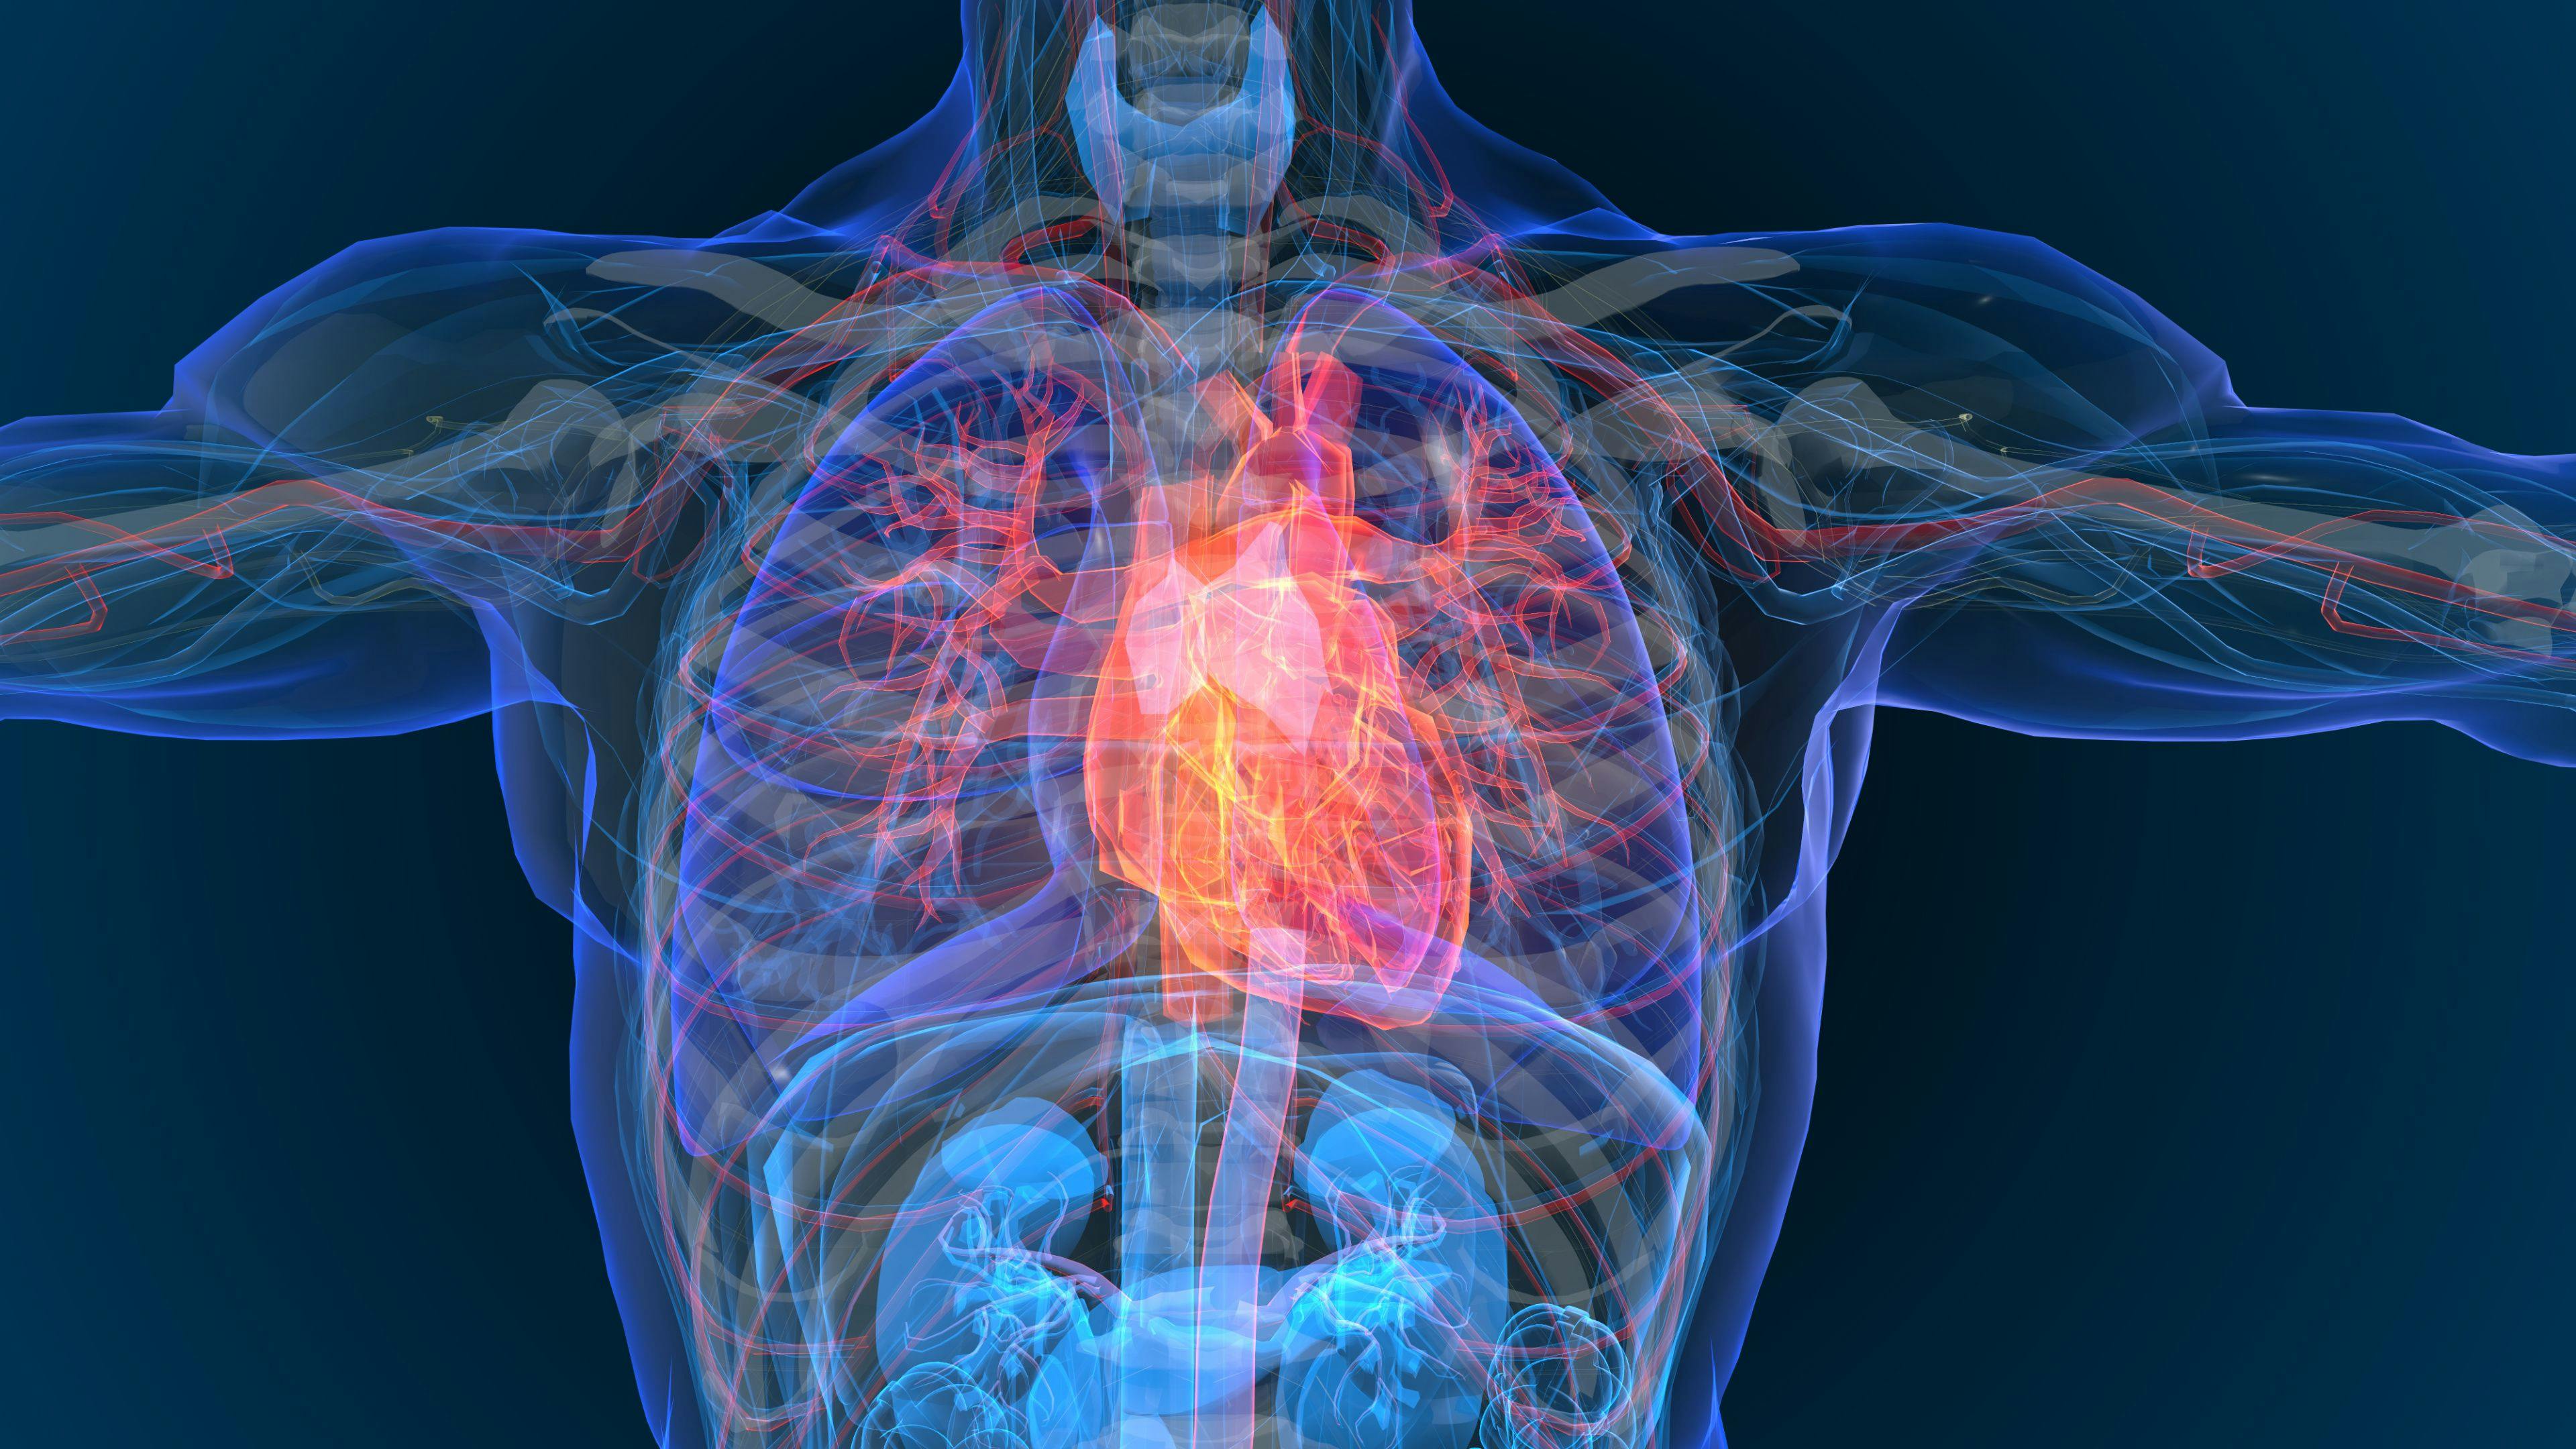 ESC 2021: Empagliflozin Found Beneficial in Patients with Heart Failure Regardless of Ejection Fraction